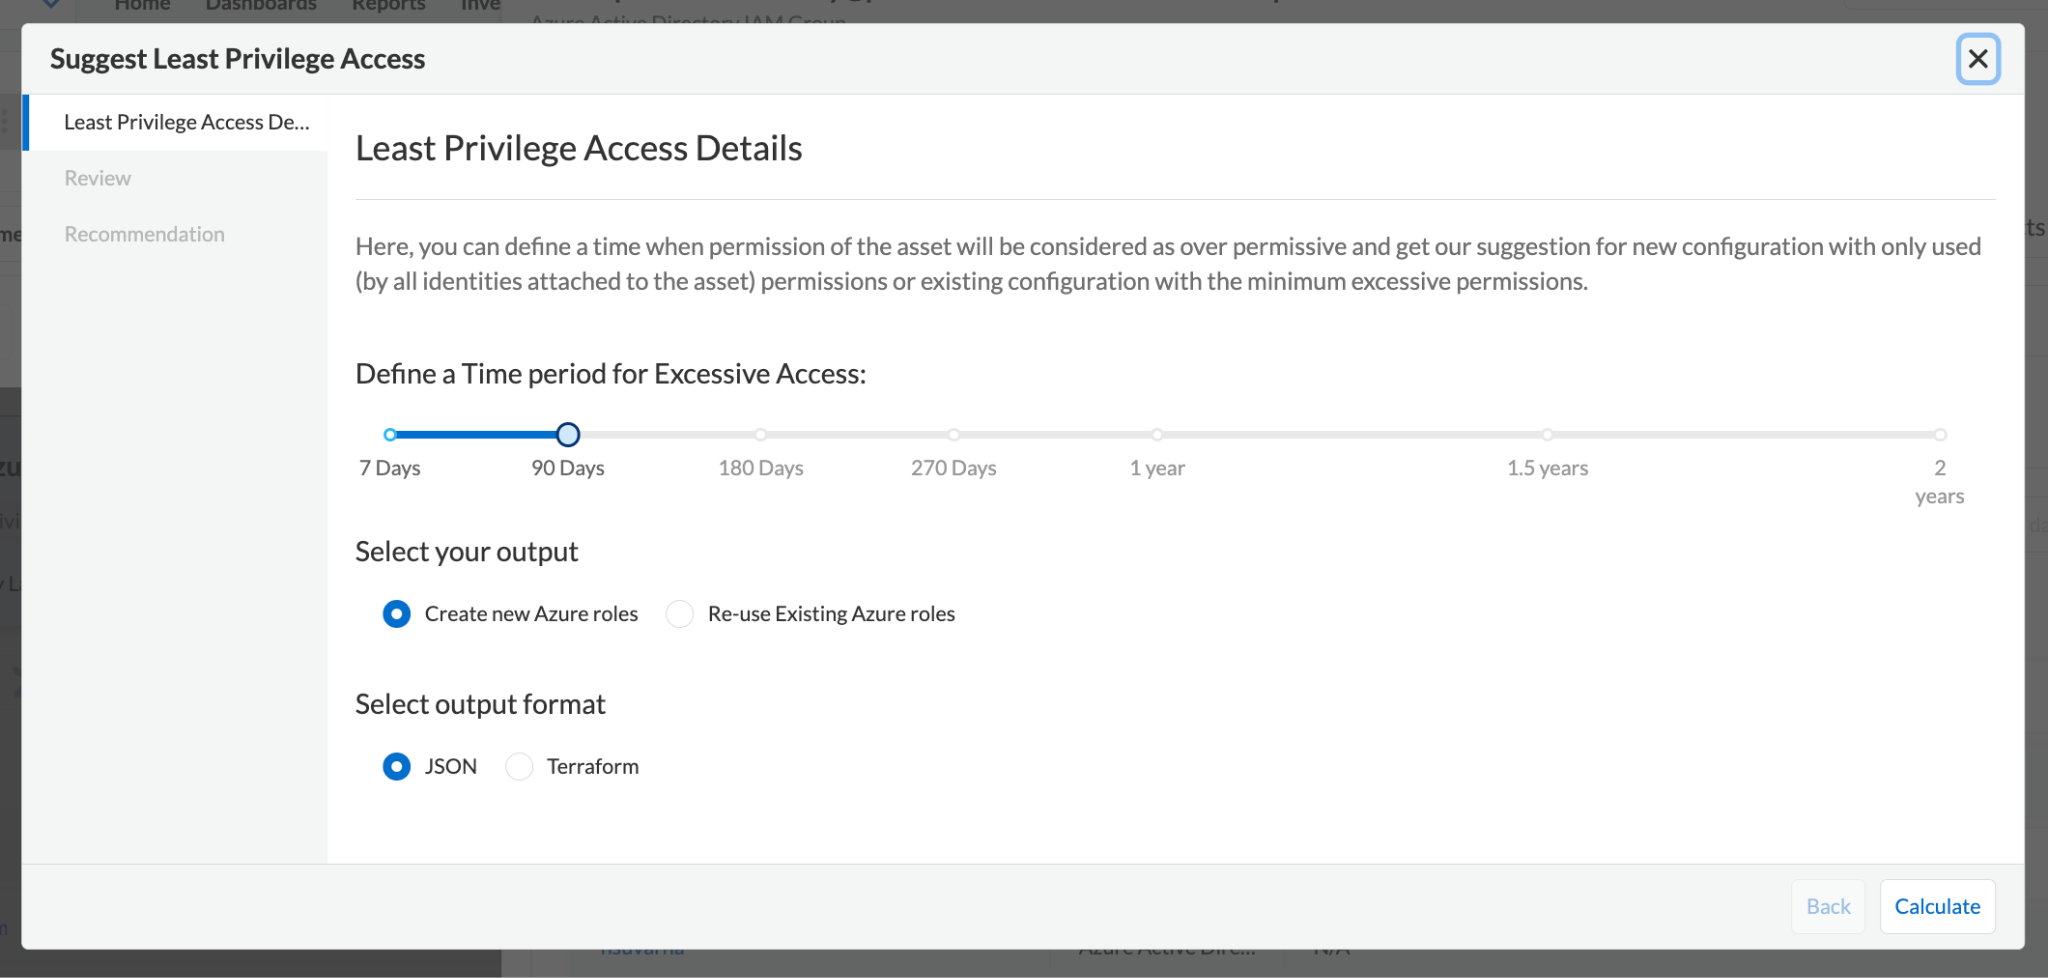 Prisma Cloud least-privileged access suggestions